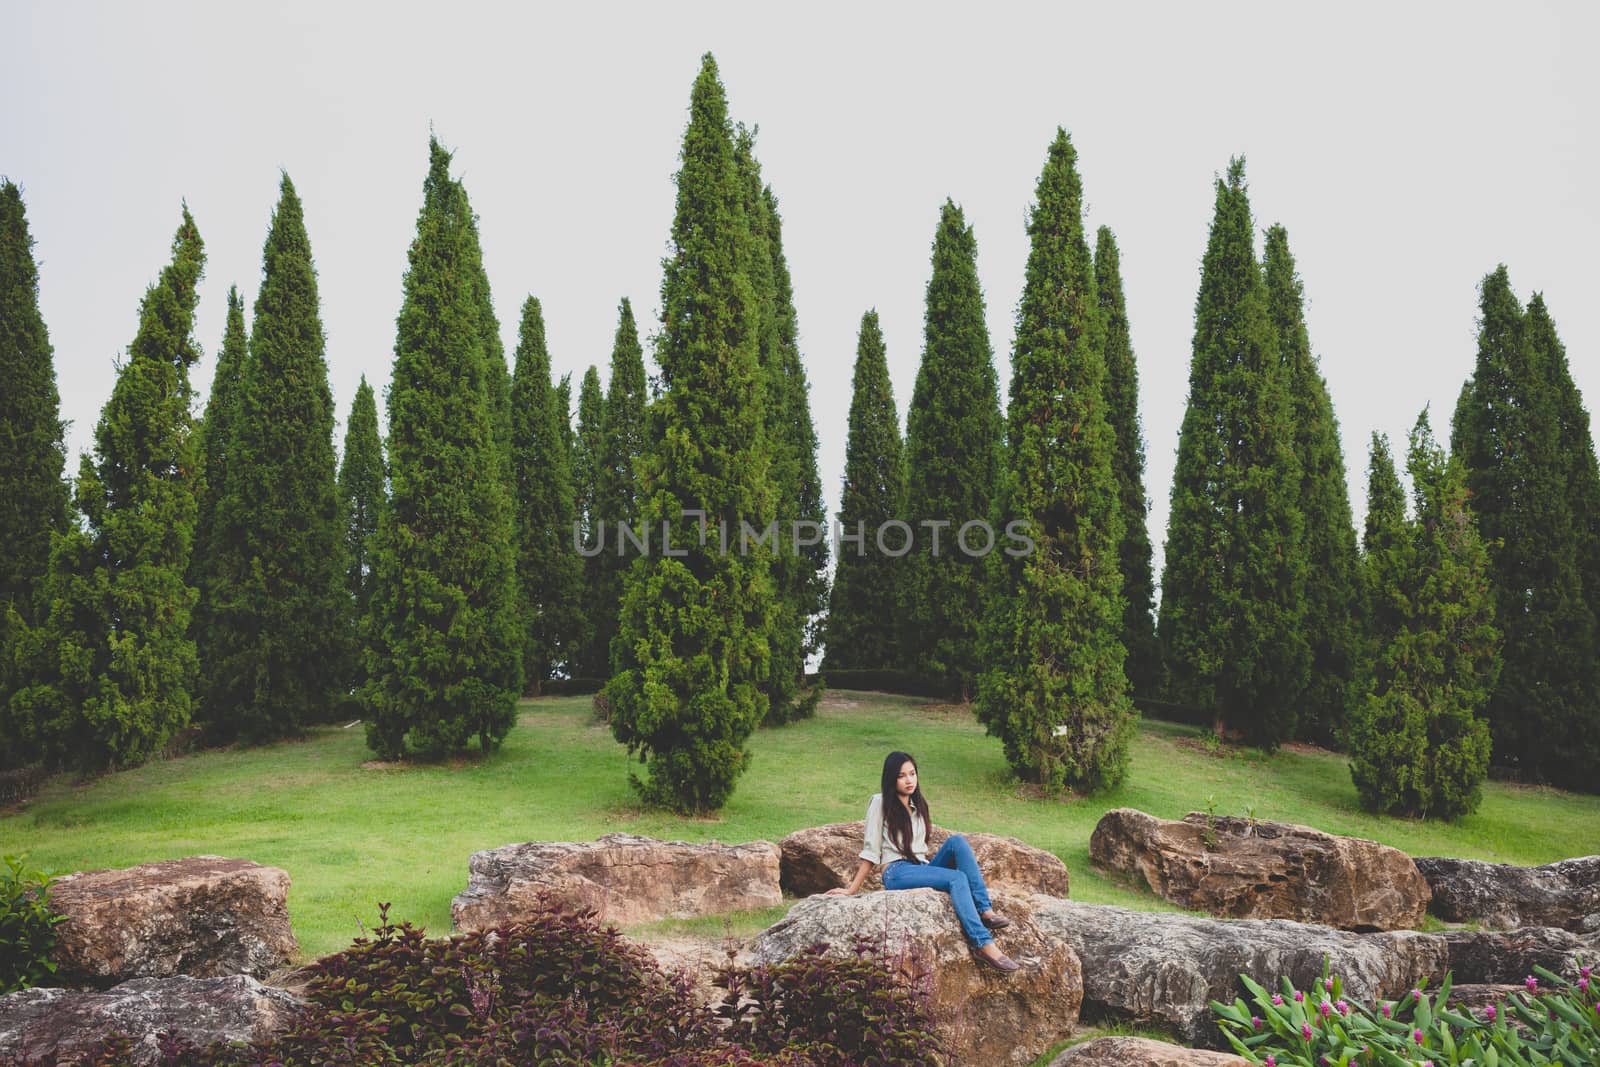 Alone women sitting on stone and pine trees with green grass in the garden. hard fade vintage tone